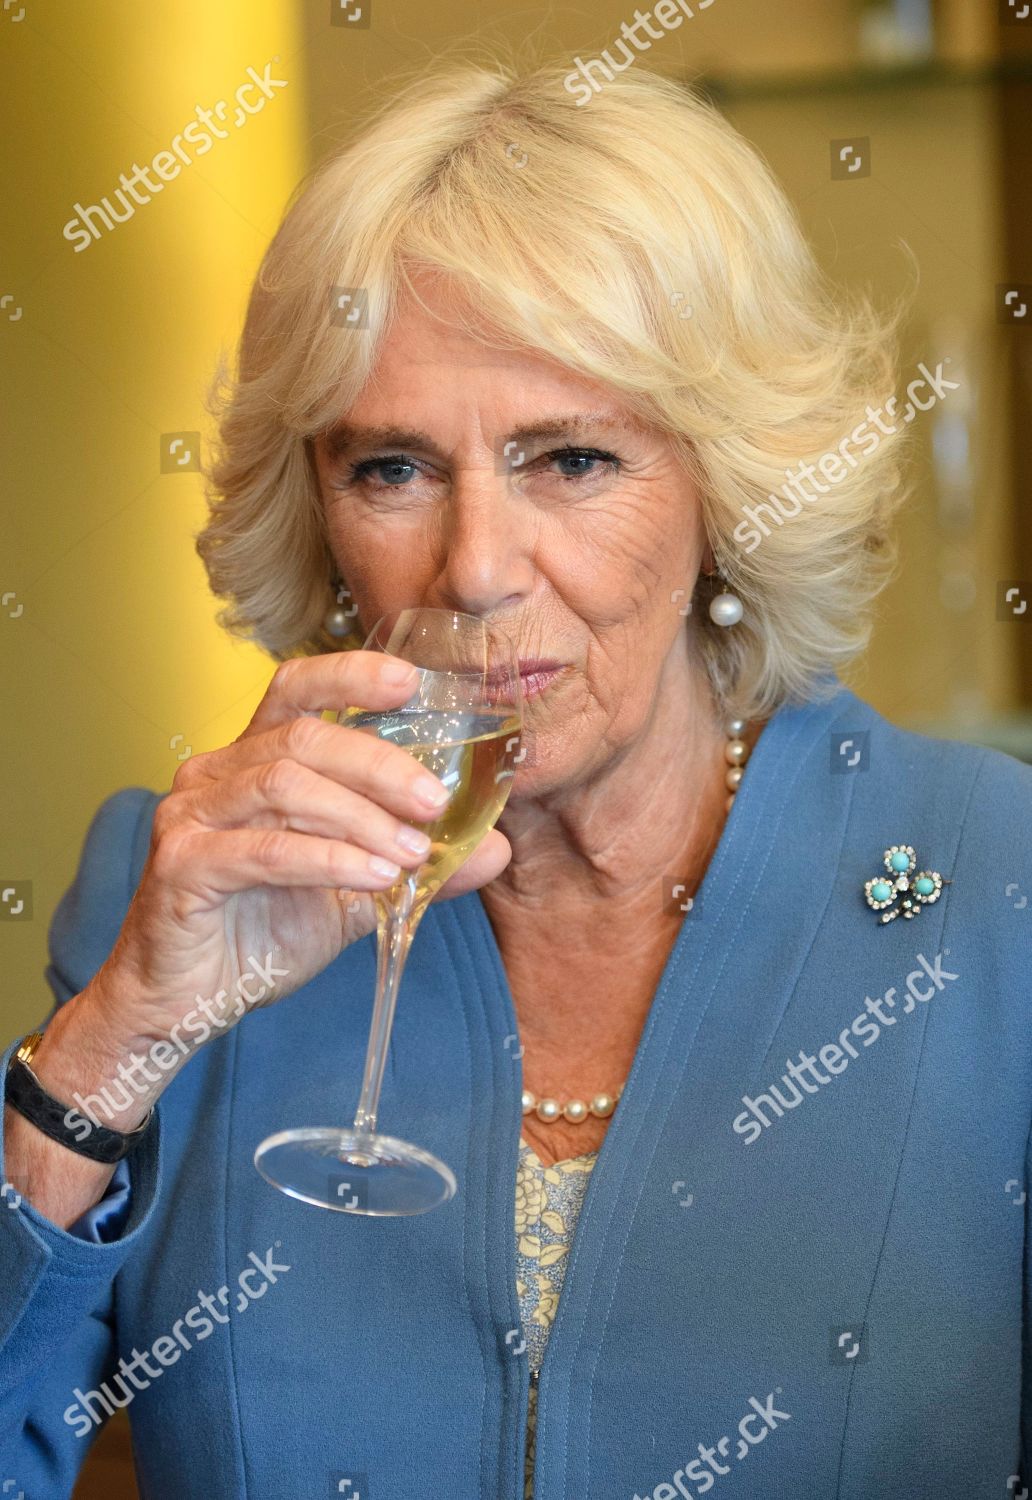 camilla-duchess-of-cornwall-visits-east-sussex-uk-shutterstock-editorial-10238528cr.jpg